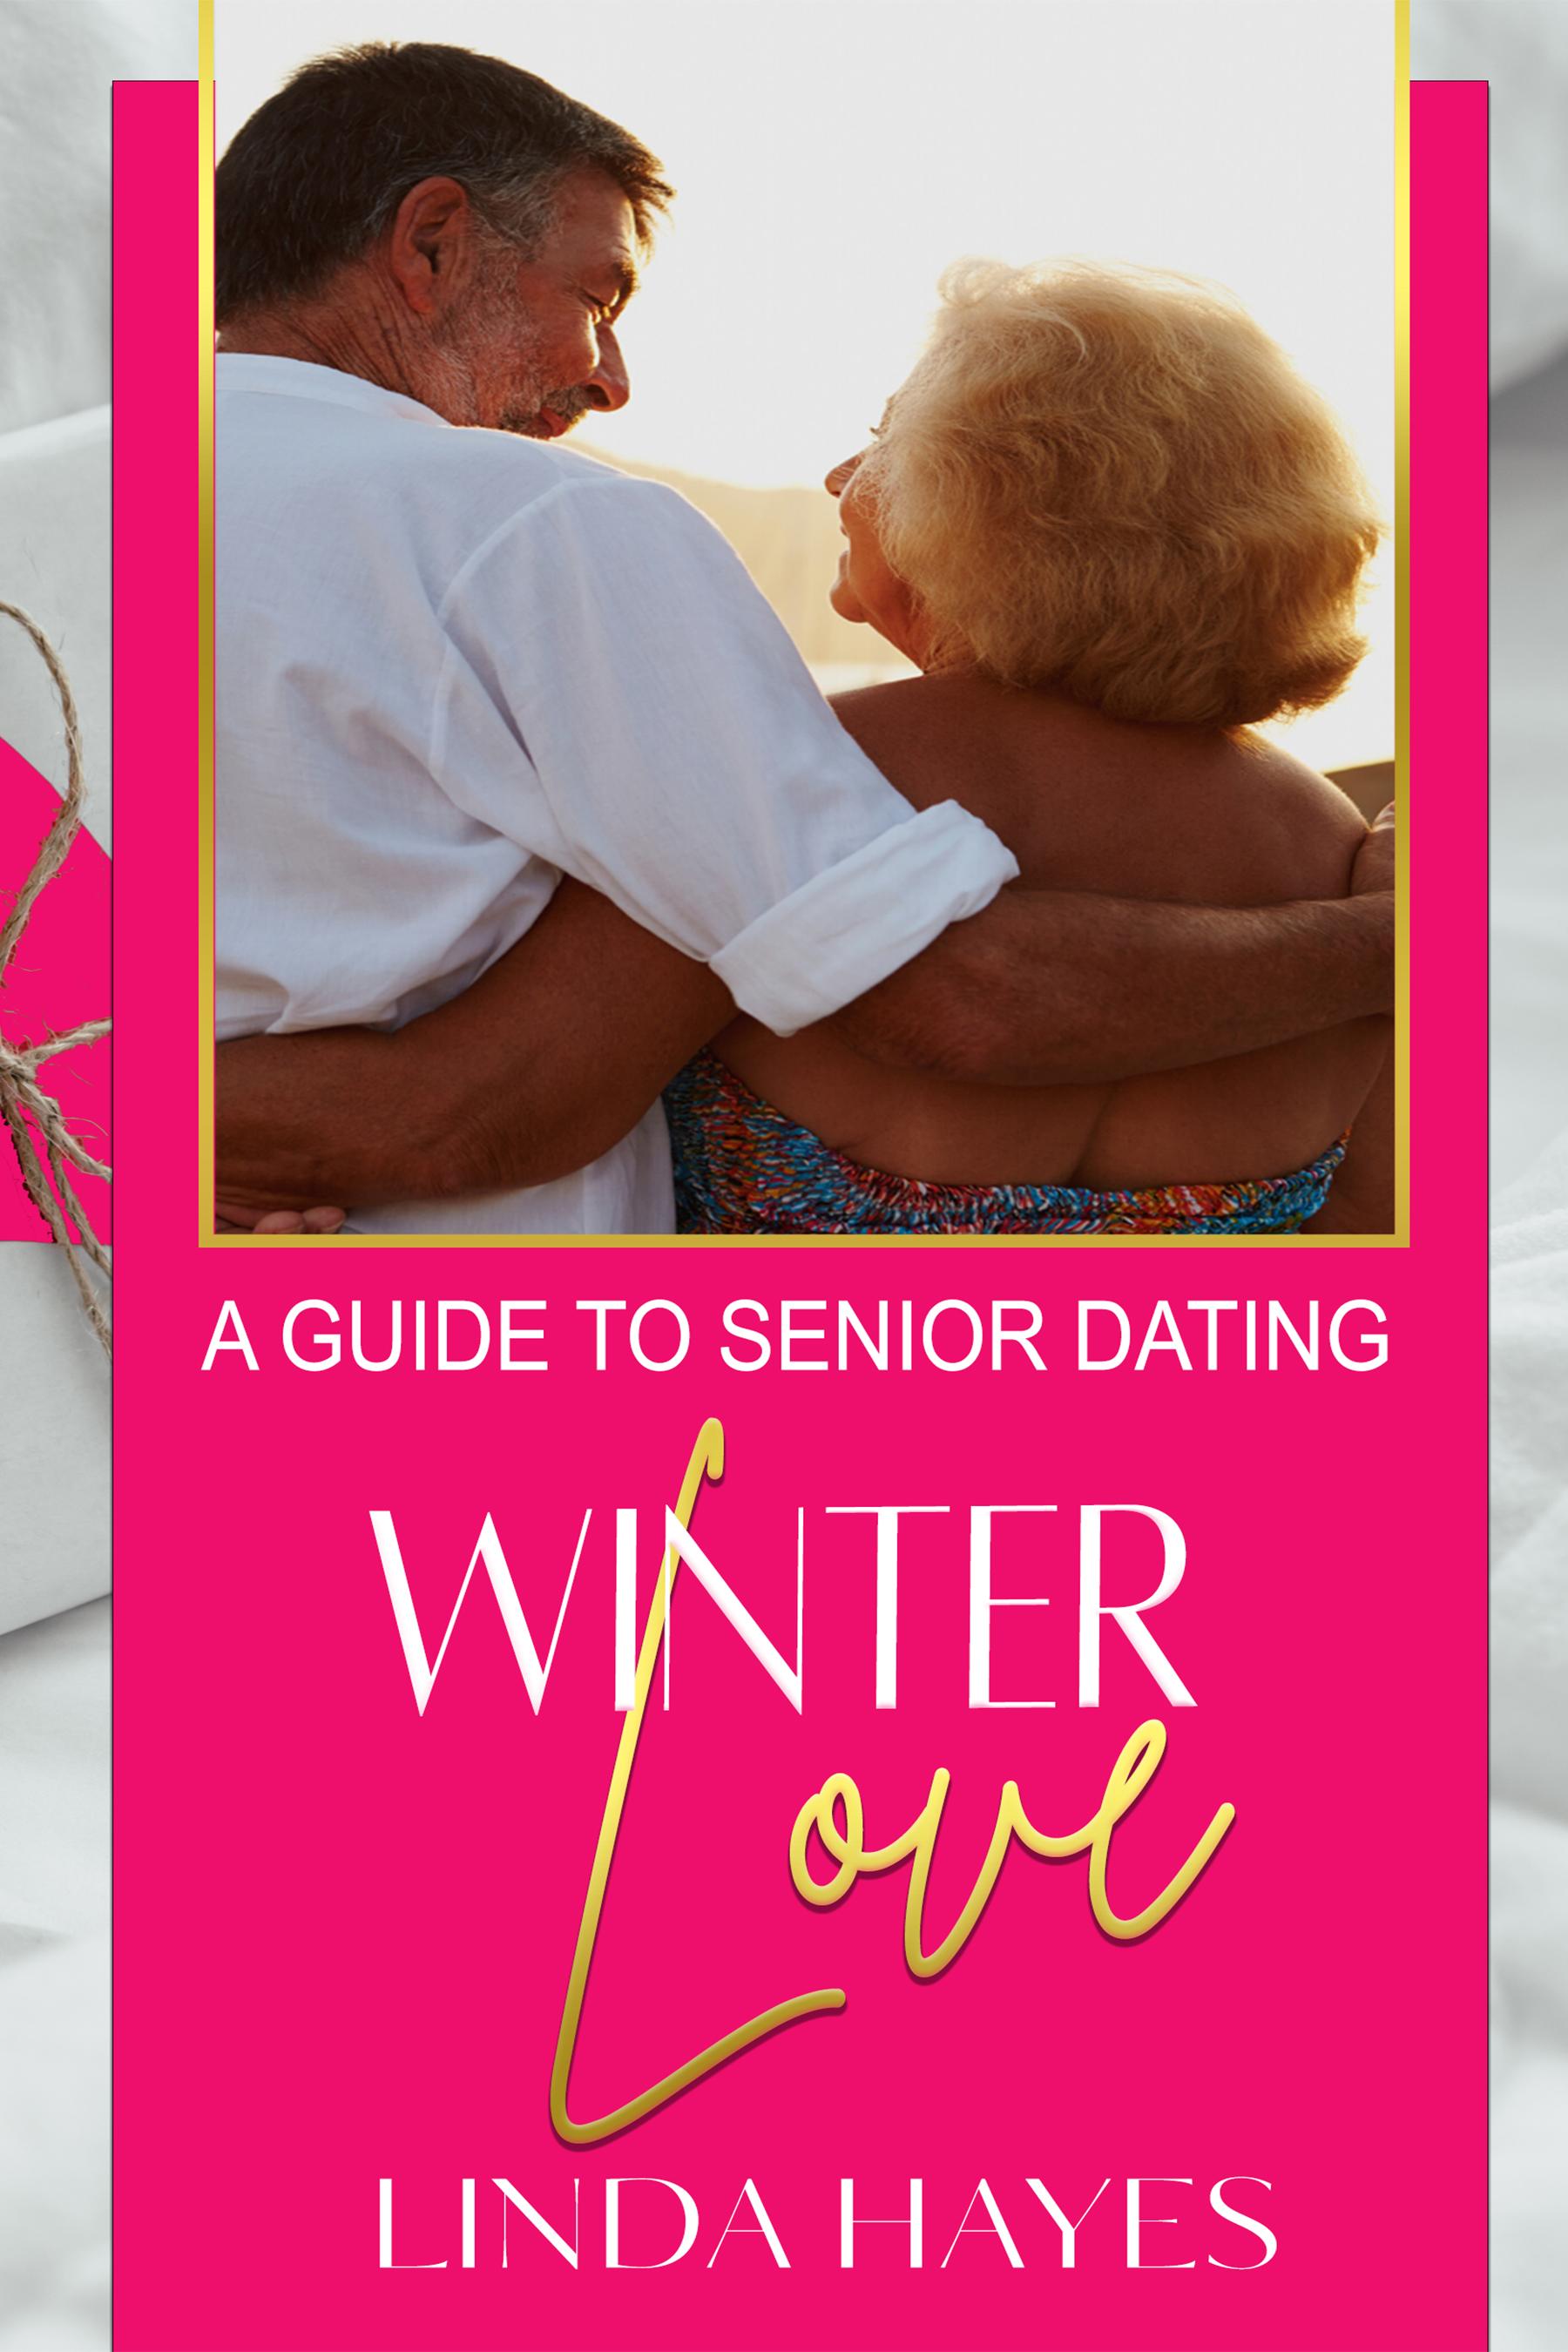 WINTER LOVE A GUIDE TO SENIOR DATING